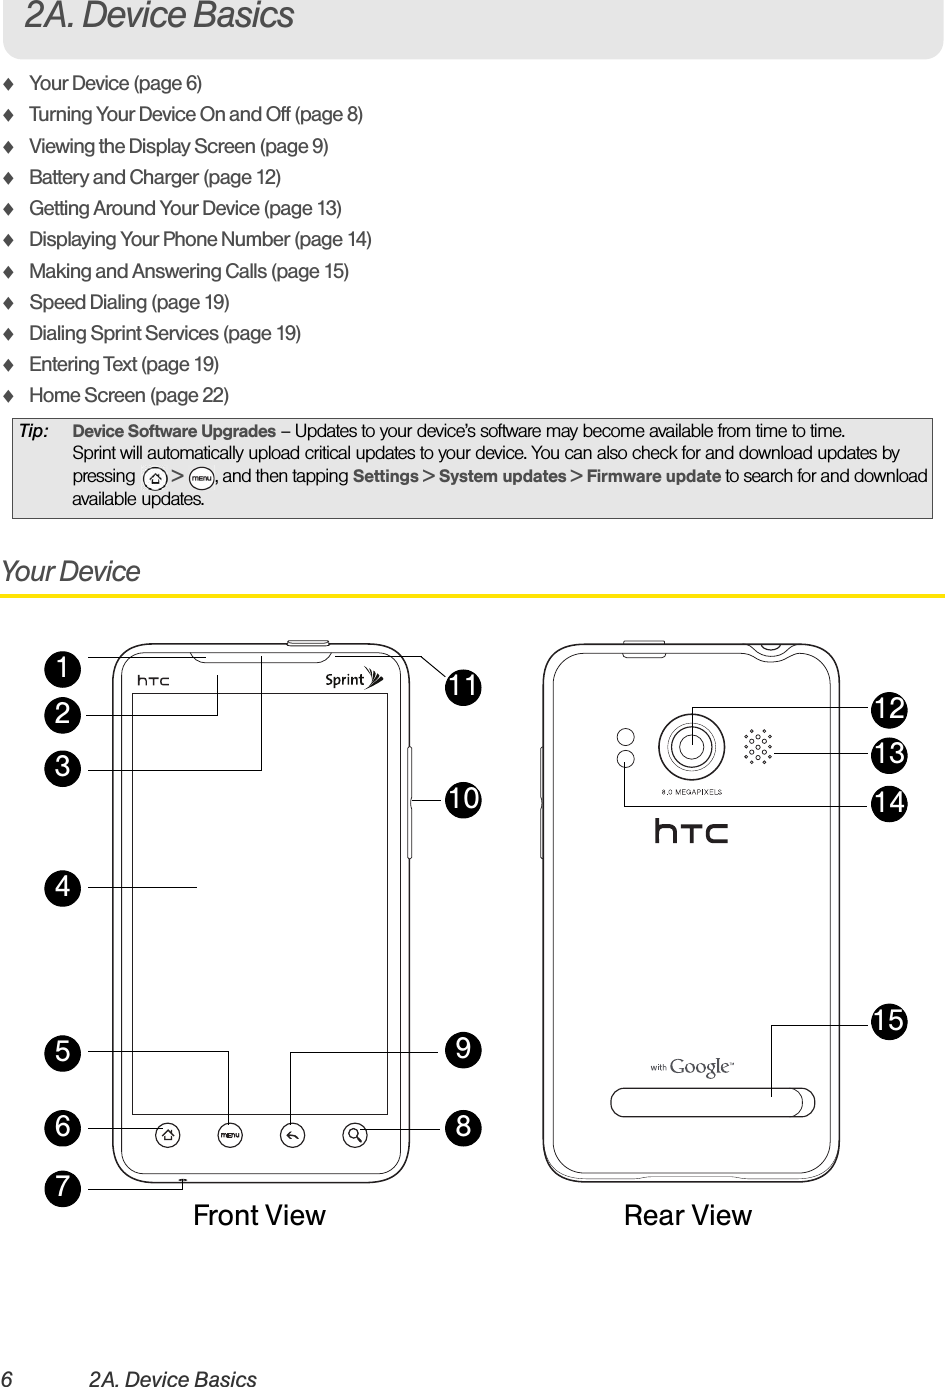 62A. Device BasicsࡗYour Device (page 6)ࡗTurning Your Device On and Off (page 8)ࡗViewing the Display Screen (page 9)ࡗBattery and Charger (page 12)ࡗGetting Around Your Device (page 13)ࡗDisplaying Your Phone Number (page 14)ࡗMaking and Answering Calls (page 15)ࡗSpeed Dialing (page 19)ࡗDialing Sprint Services (page 19)ࡗEntering Text (page 19)ࡗHome Screen (page 22)Your DeviceTip: Device Software Upgrades – Updates to your device’s software may become available from time to time. Sprint will automatically upload critical updates to your device. You can also check for and download updates by pressing   &gt;  , and then tapping Settings &gt; System updates &gt; Firmware update to search for and download available updates.2A. Device Basics164235131281514791011Front View Rear View